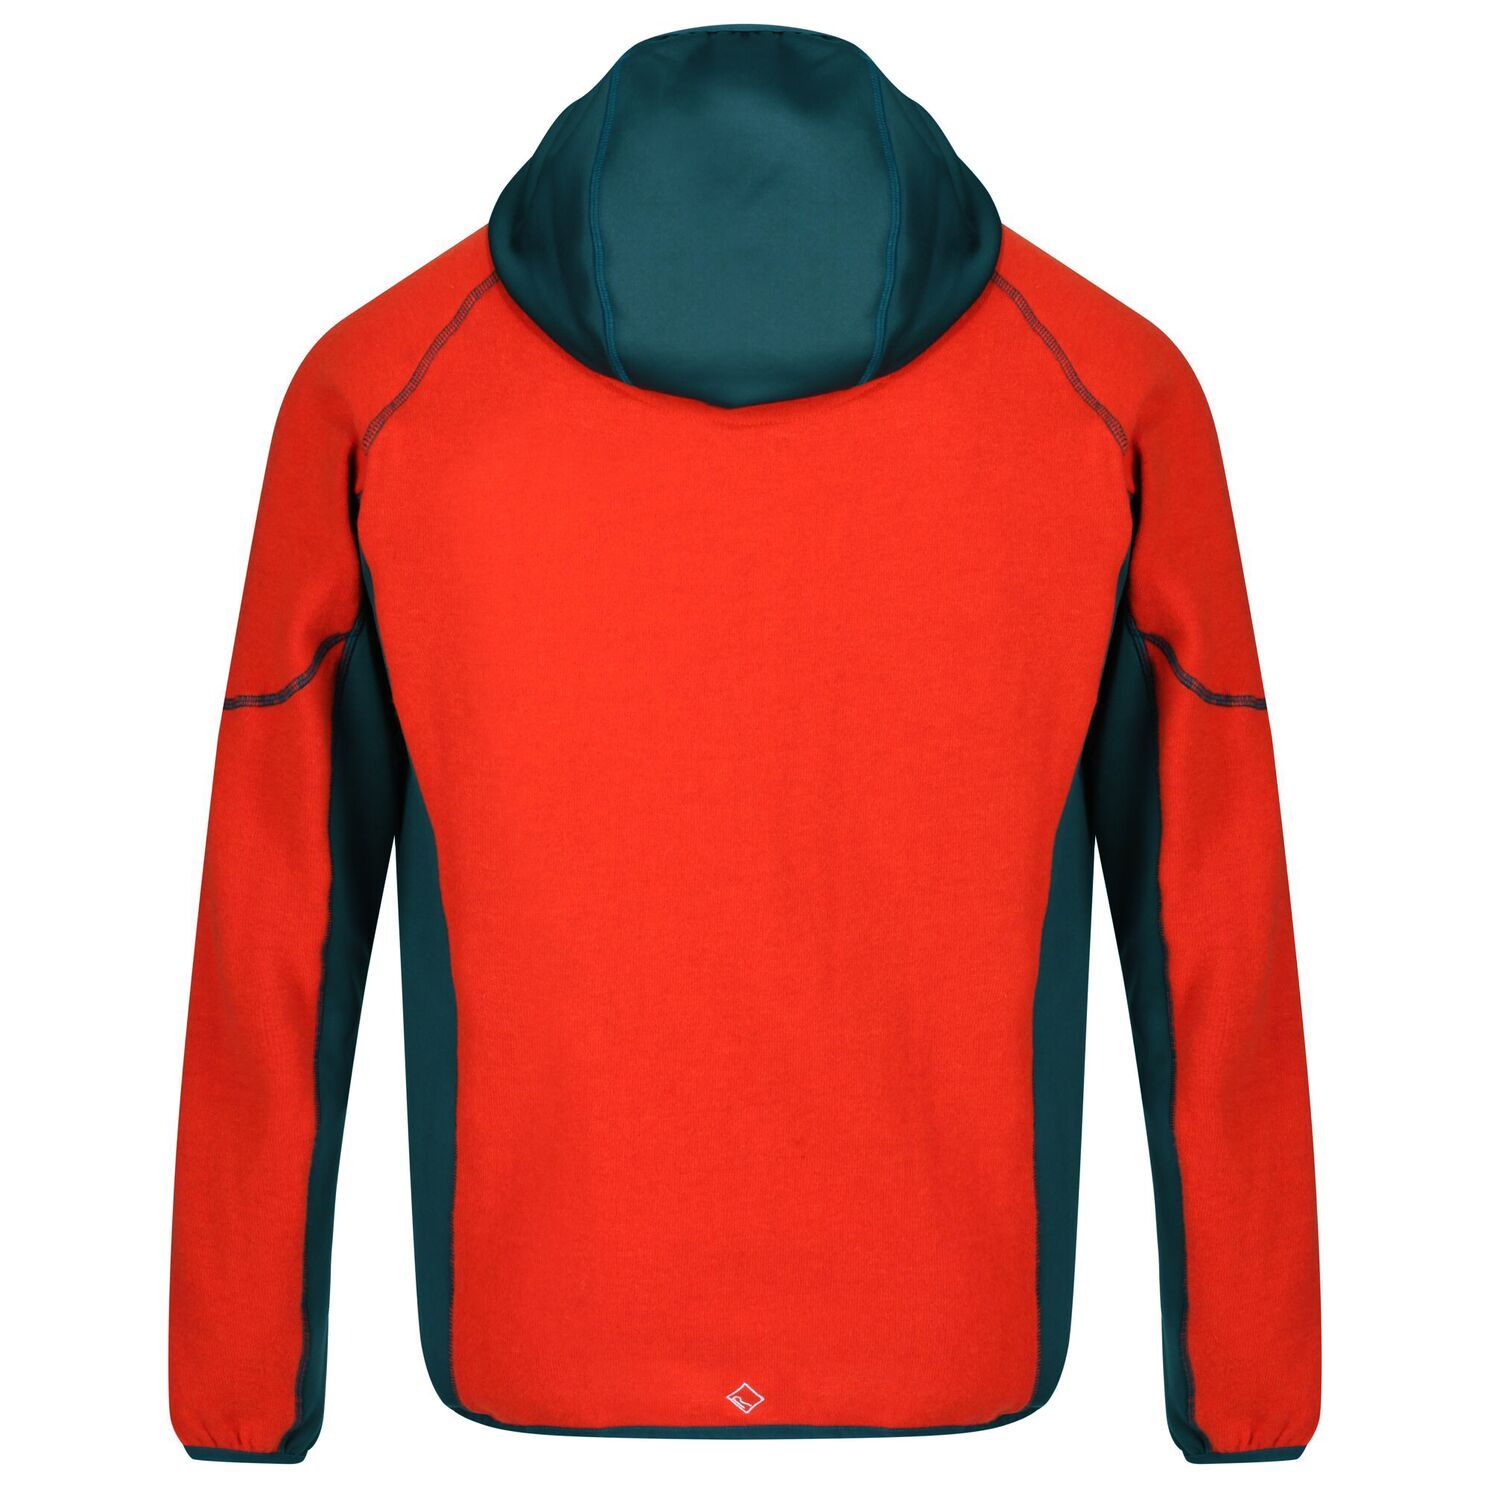 Material: wool: 50%, polyester: 50%. 50/50 wool and polyester knit effect fleece. Extol stretch side with hood and underarm panels. Grown on hood. 2 zipped lower pockets. Stretch binding to hood opening, cuffs and hem. Regatta outdoors embroidery on the chest. Motion-friendly raglan sleeves that sit smoothly under rucksacks and stretch binding for a contoured fit that won´t ride up and seals out the elements.